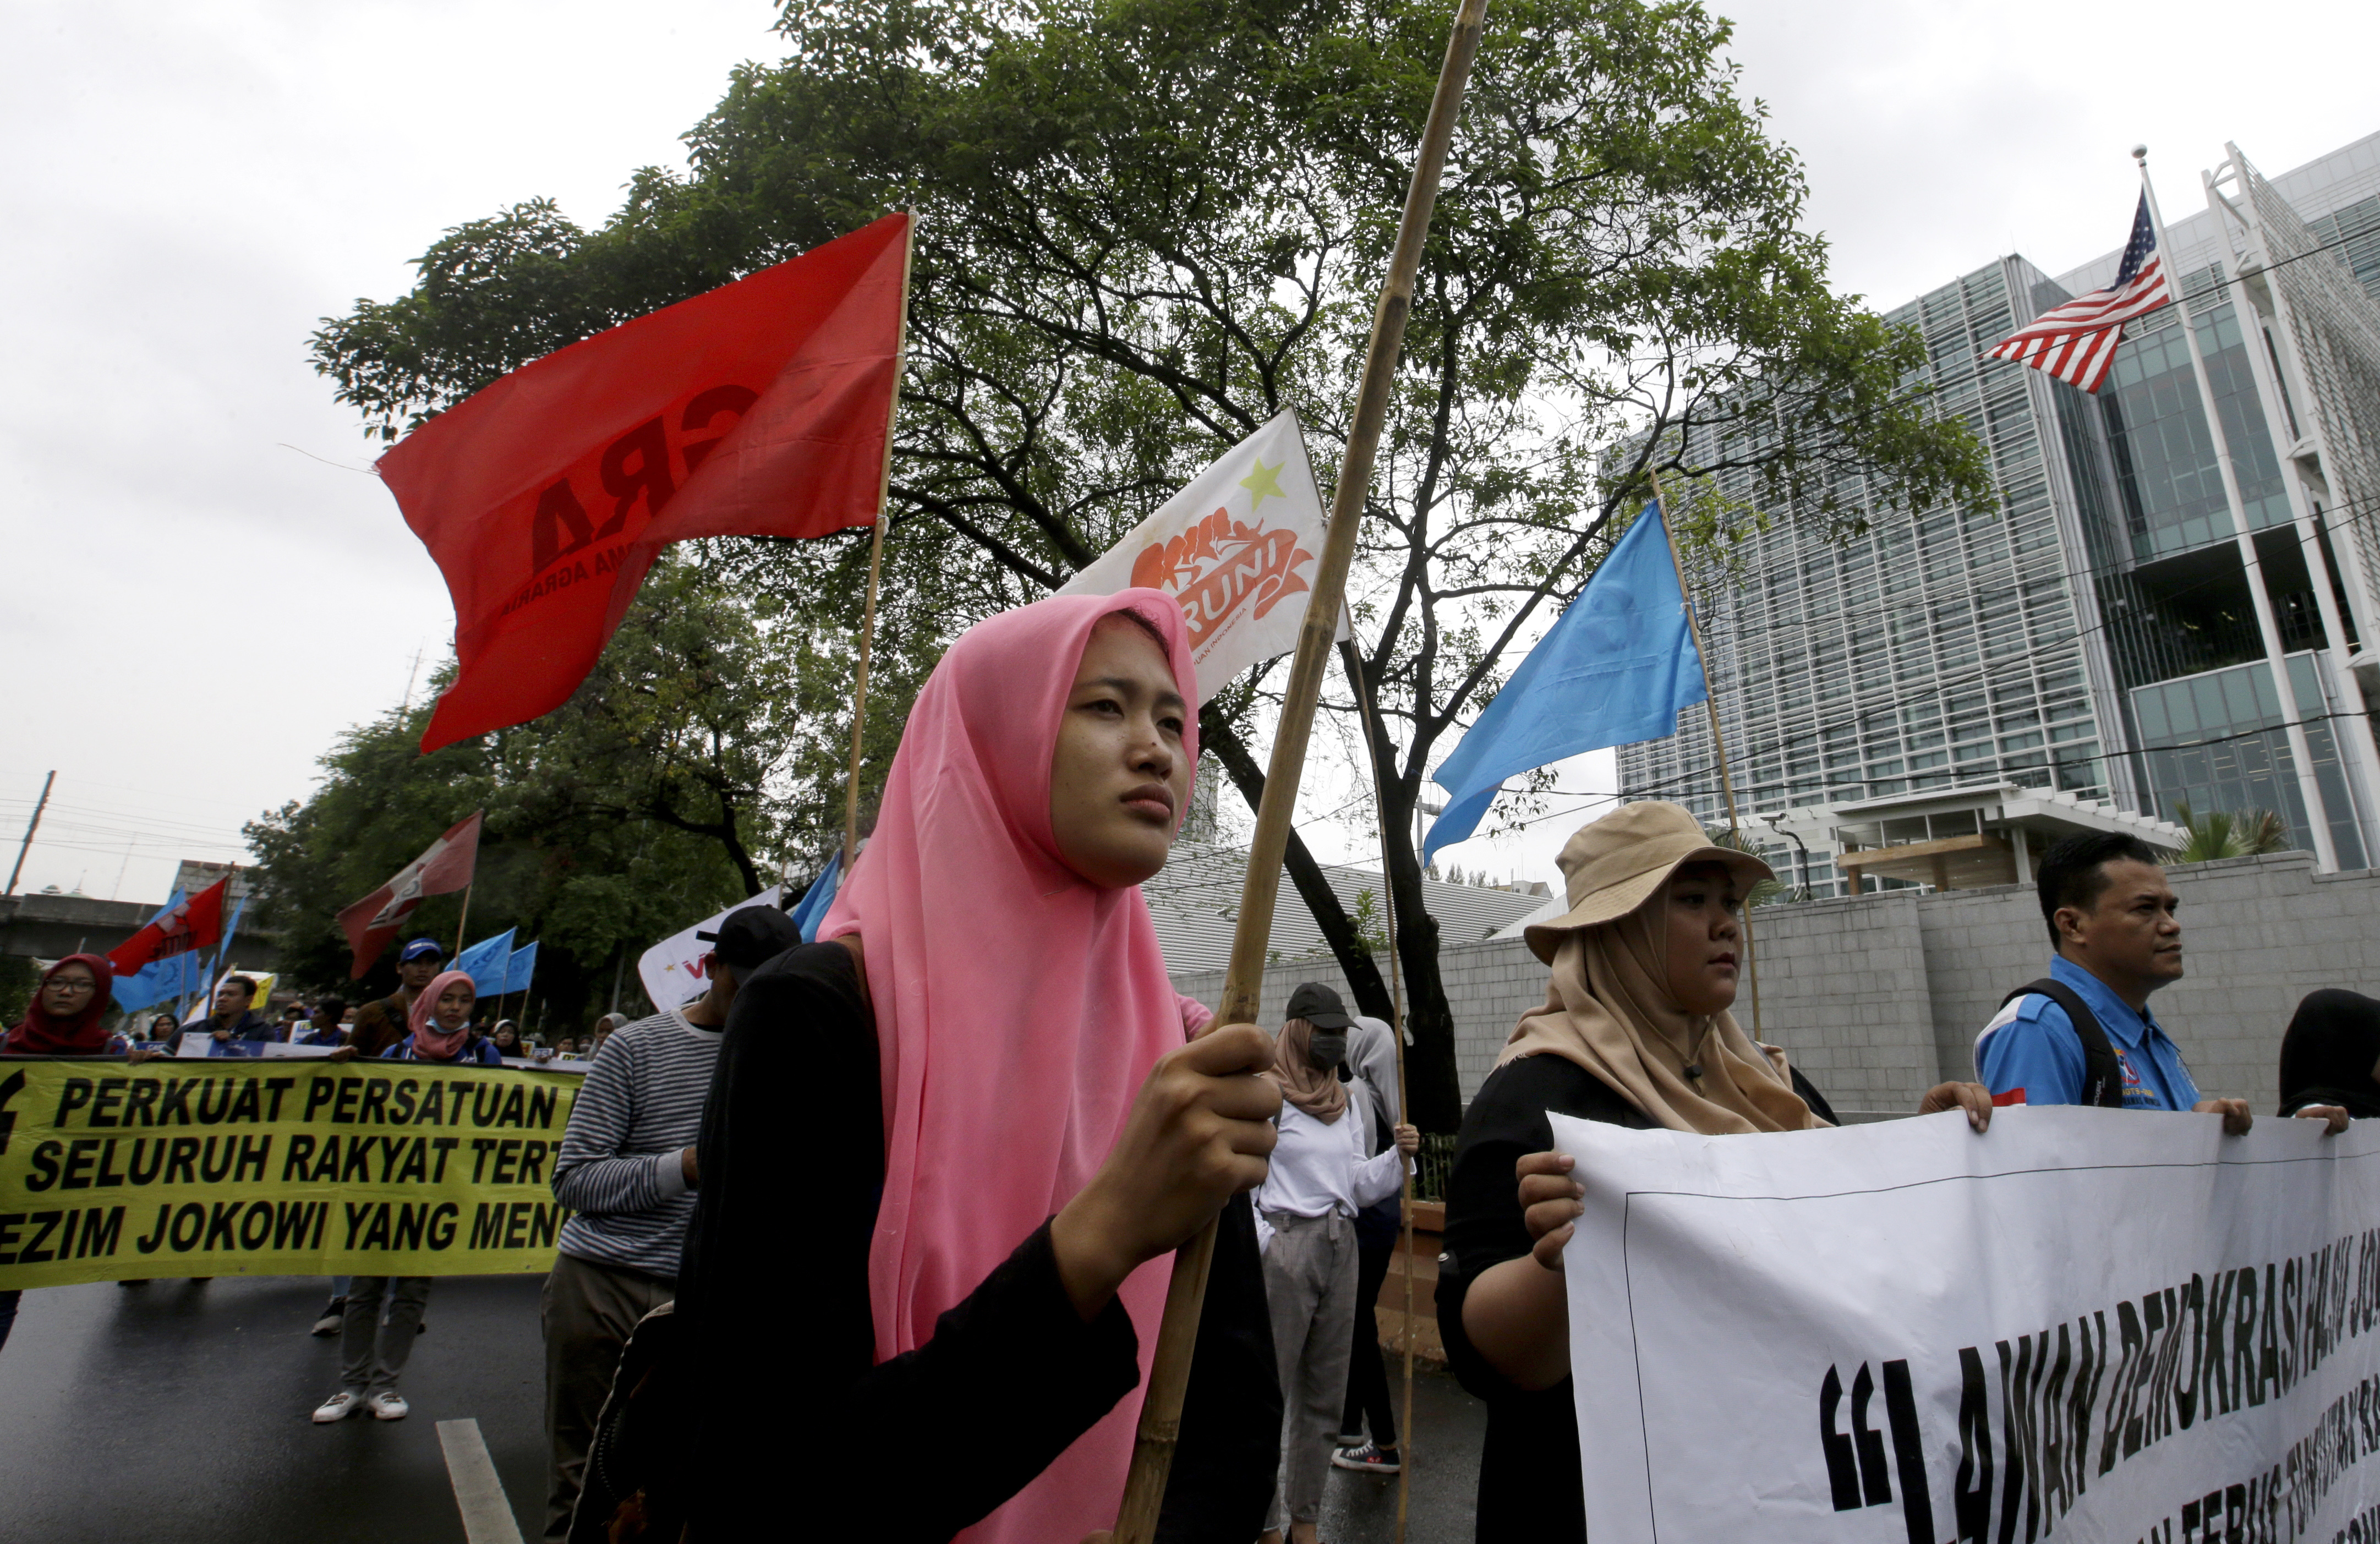 Activists march during rally to mark the Human Rights Day outside U.S. embassy in Jakarta, Indonesia, Tuesday, Dec. 10, 2019. Rights activists marched in Indonesia's capital Tuesday, calling on the government of the world's most populous Muslim and third largest democracy to protect and respect human rights.(AP Photo/Achmad Ibrahim)